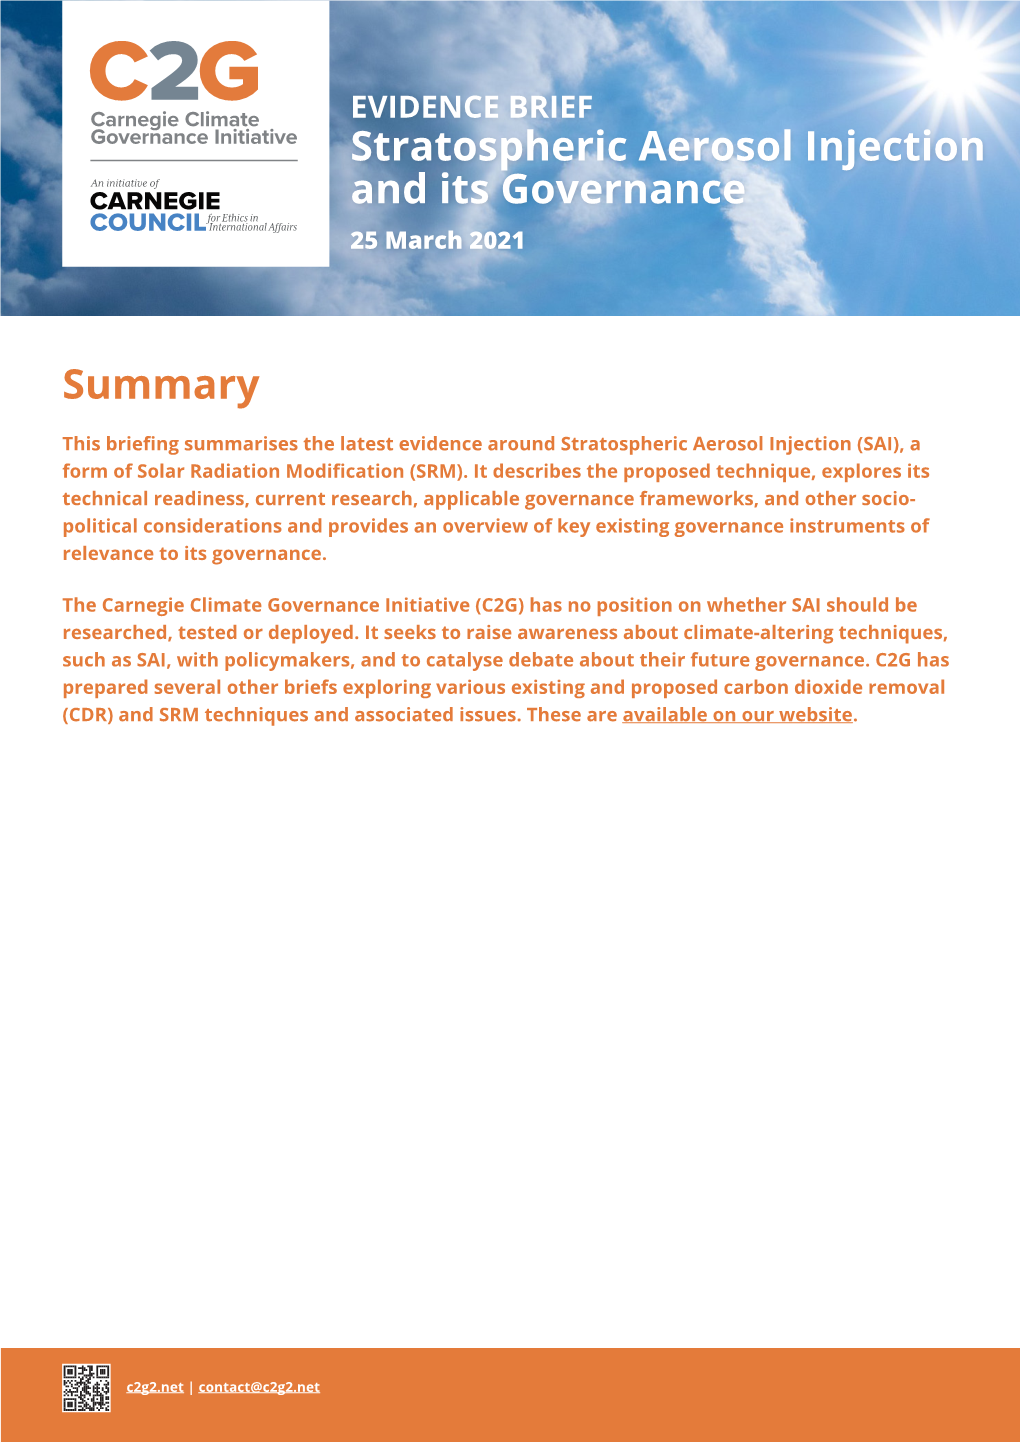 C2G Evidence Brief: Stratospheric Aerosol Injection and Its Governance